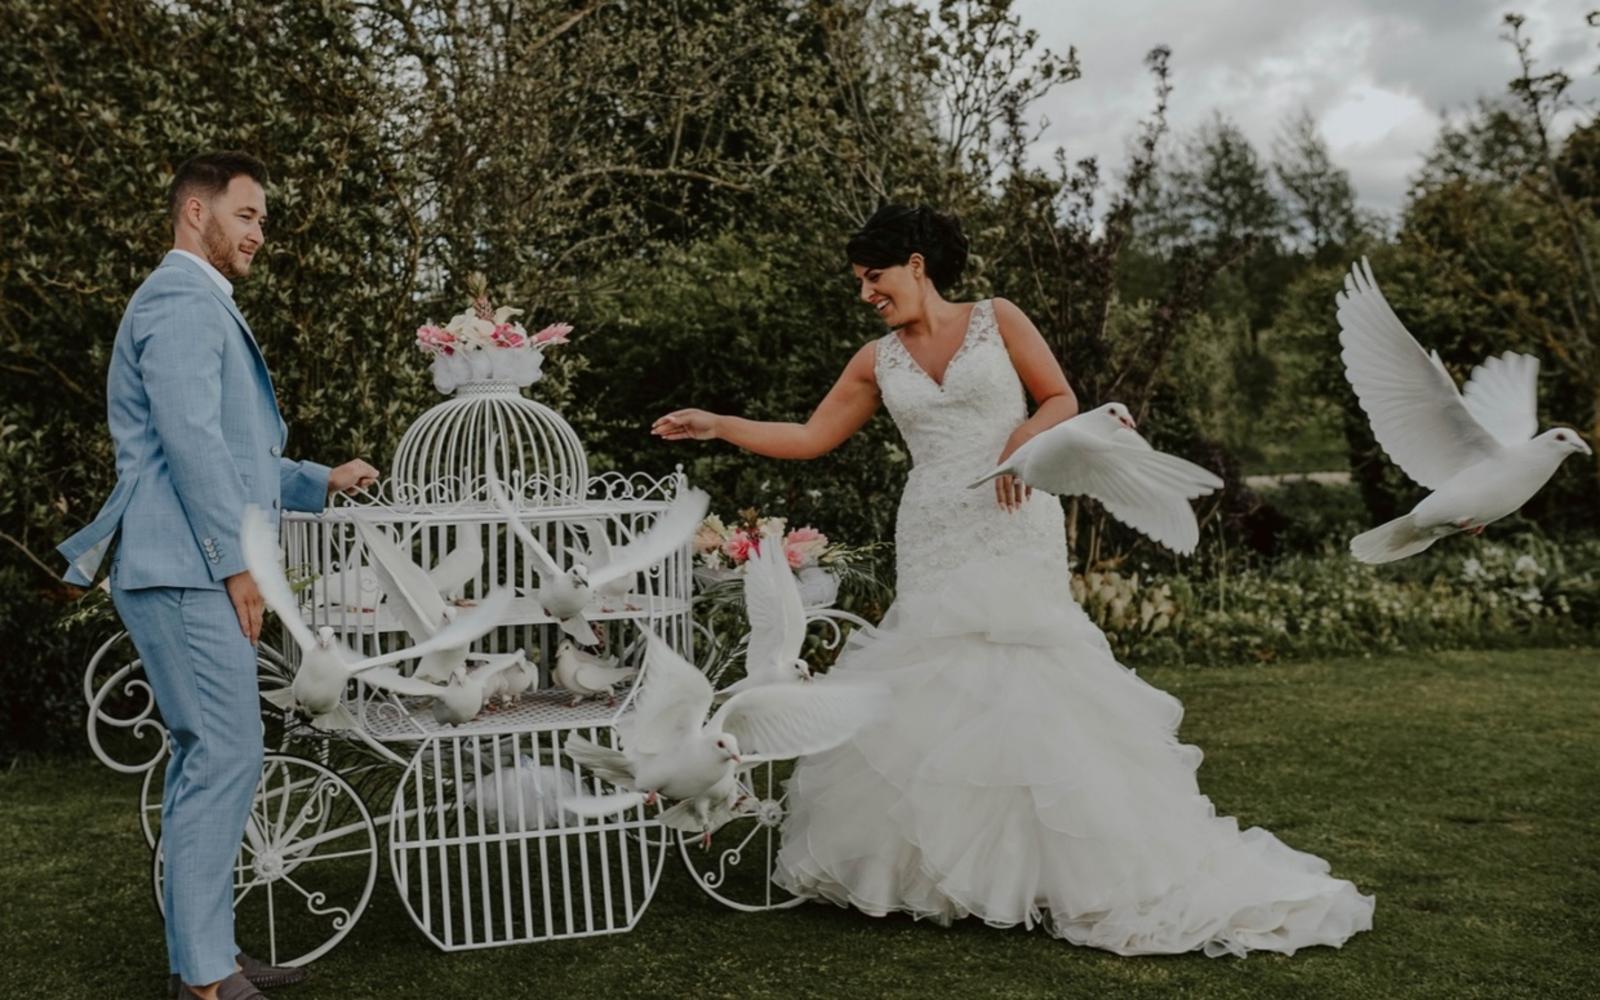 Wrag Barn Golf and Country Club wedding venue Highworth Swindon Wiltshire fully licensed for civil ceremonies Joanna Brooks Photography princess carriage with white doves for release